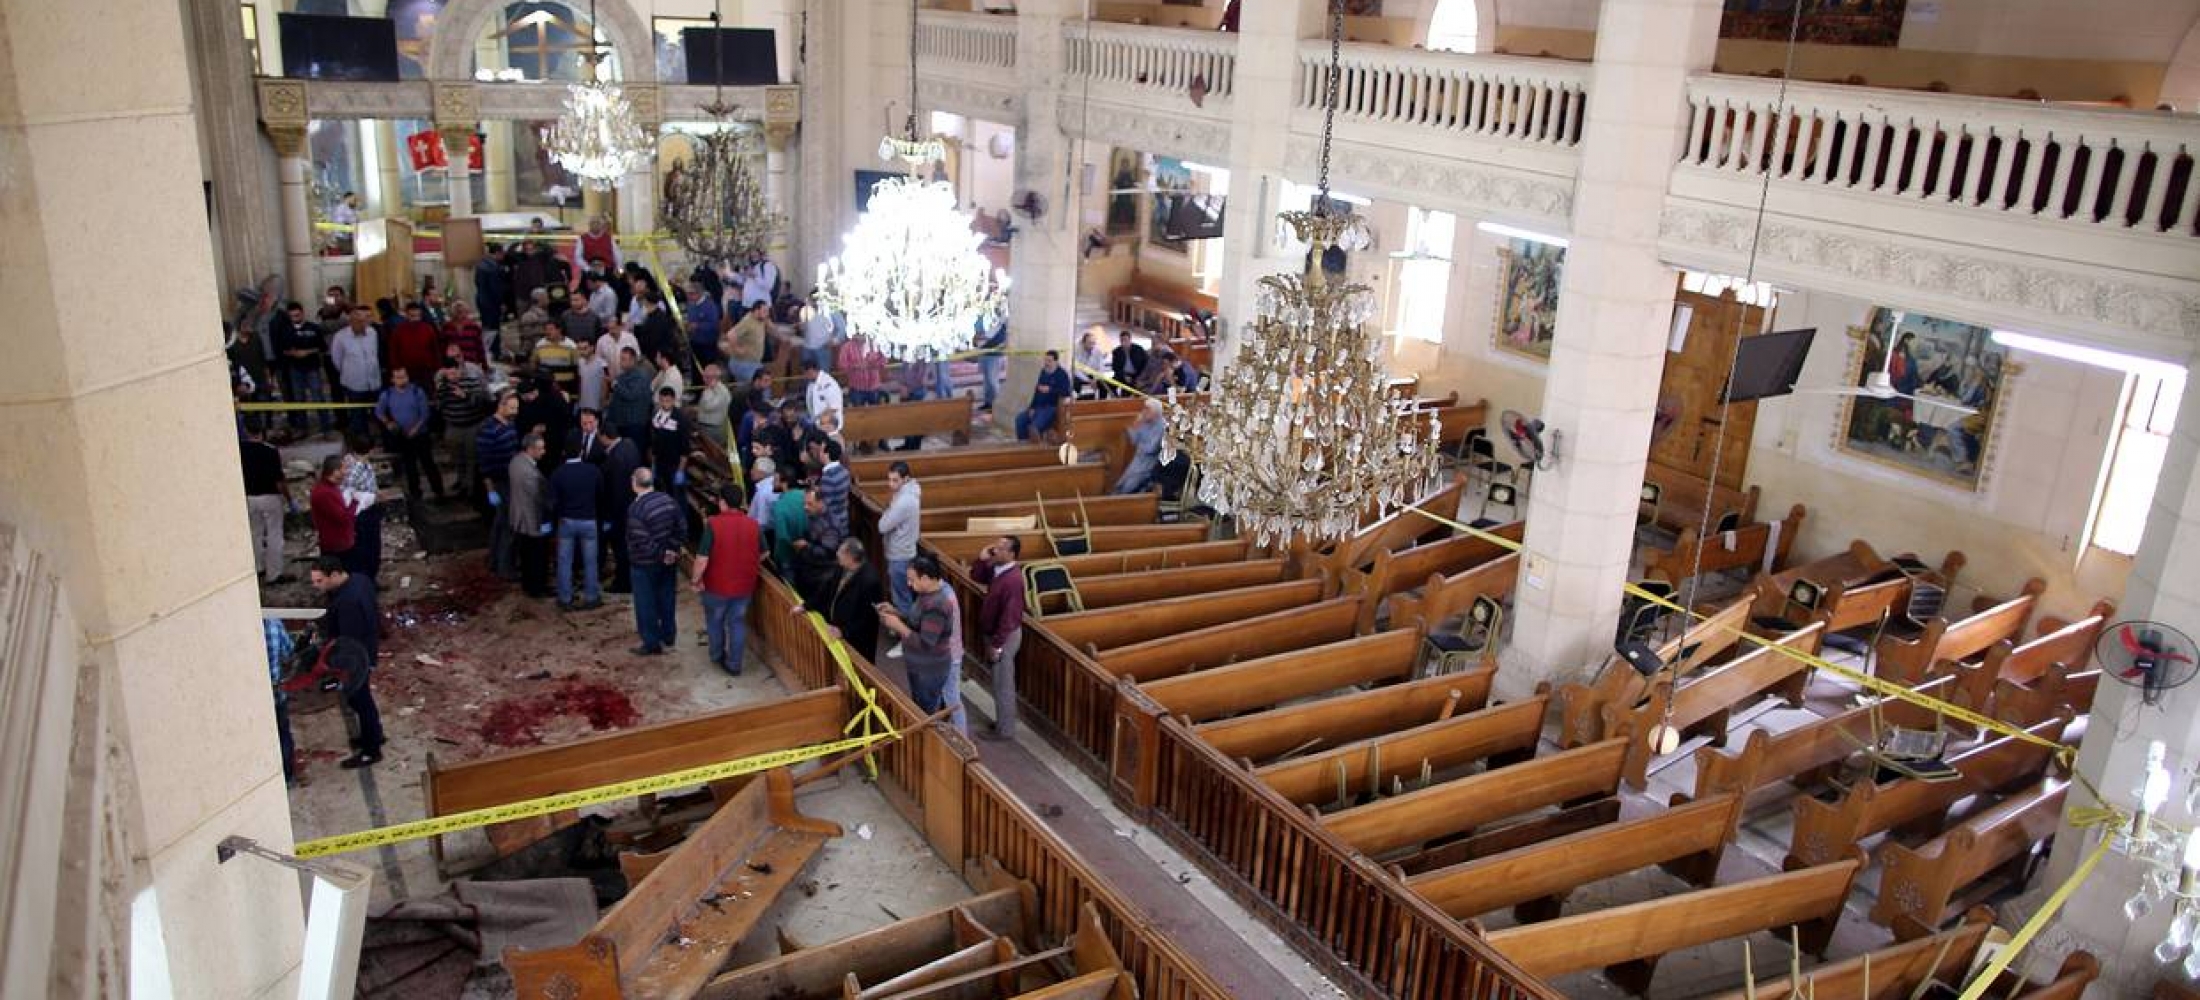 Palm Sunday Massacre Why can’t Egypt’s government protect its